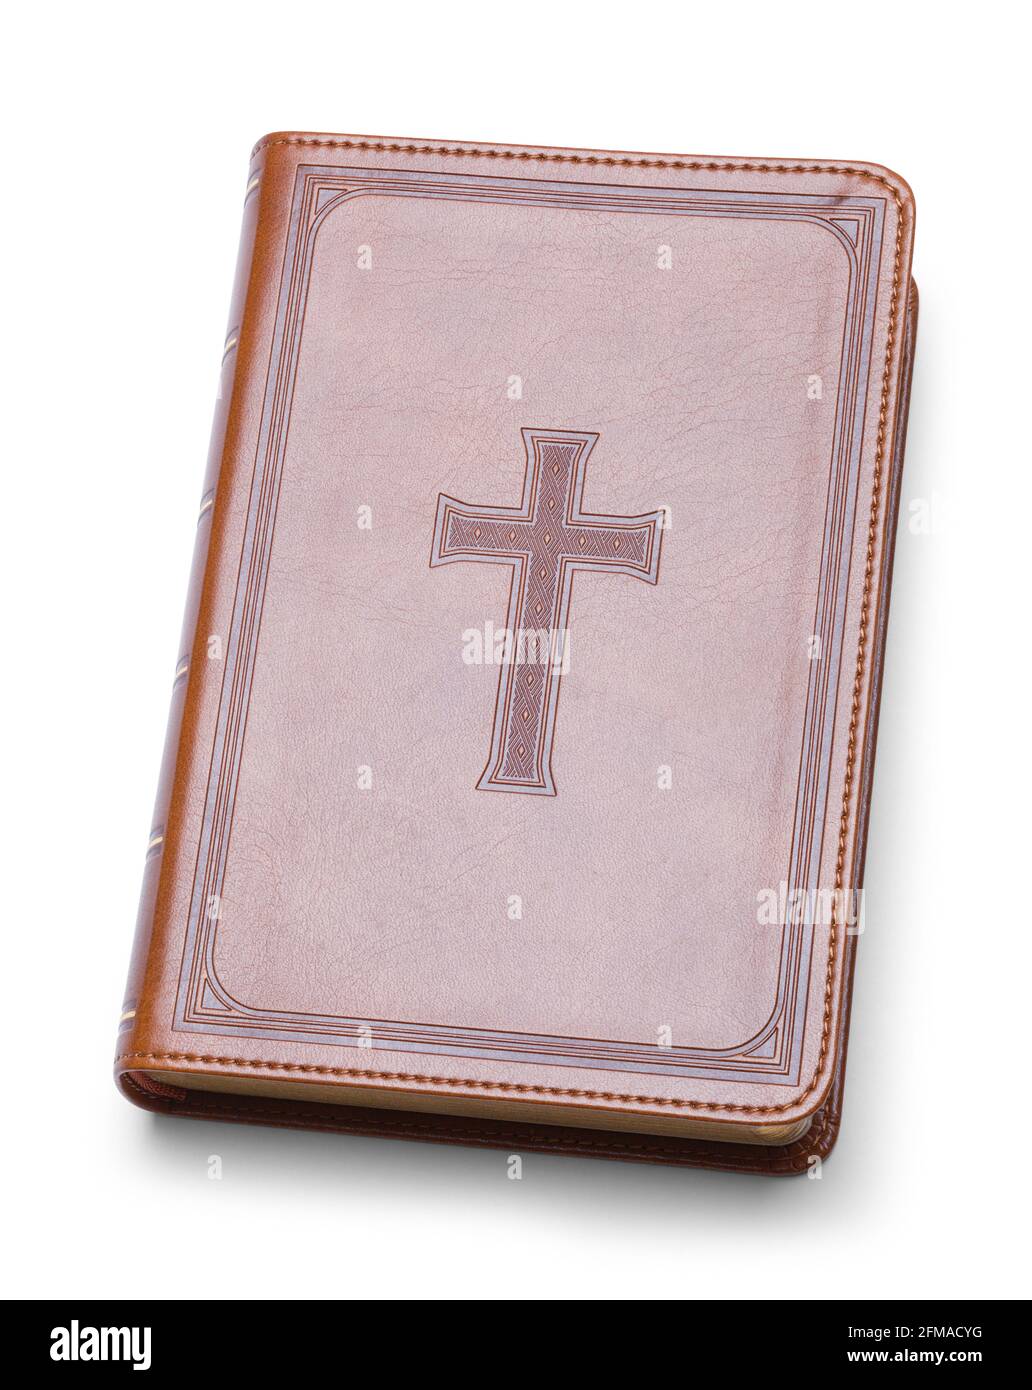 Leather Bible with Cross Embossed on Cover Cut Out. Stock Photo